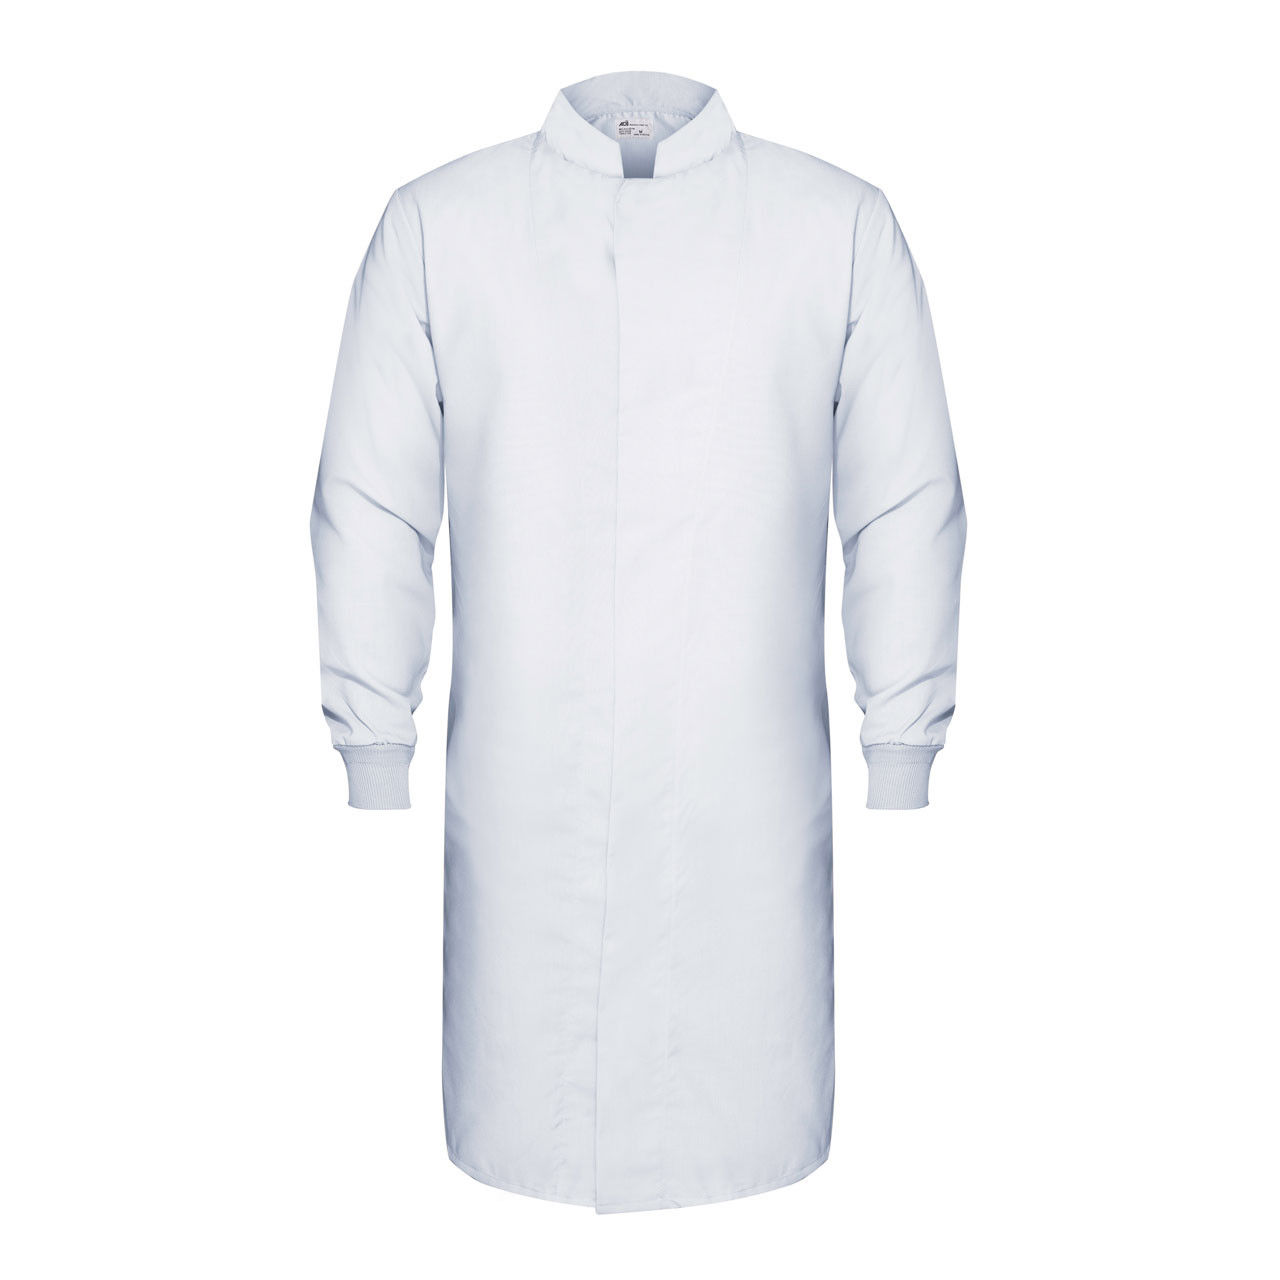 HACCP Knit Cuff Lab Coat, White Questions & Answers